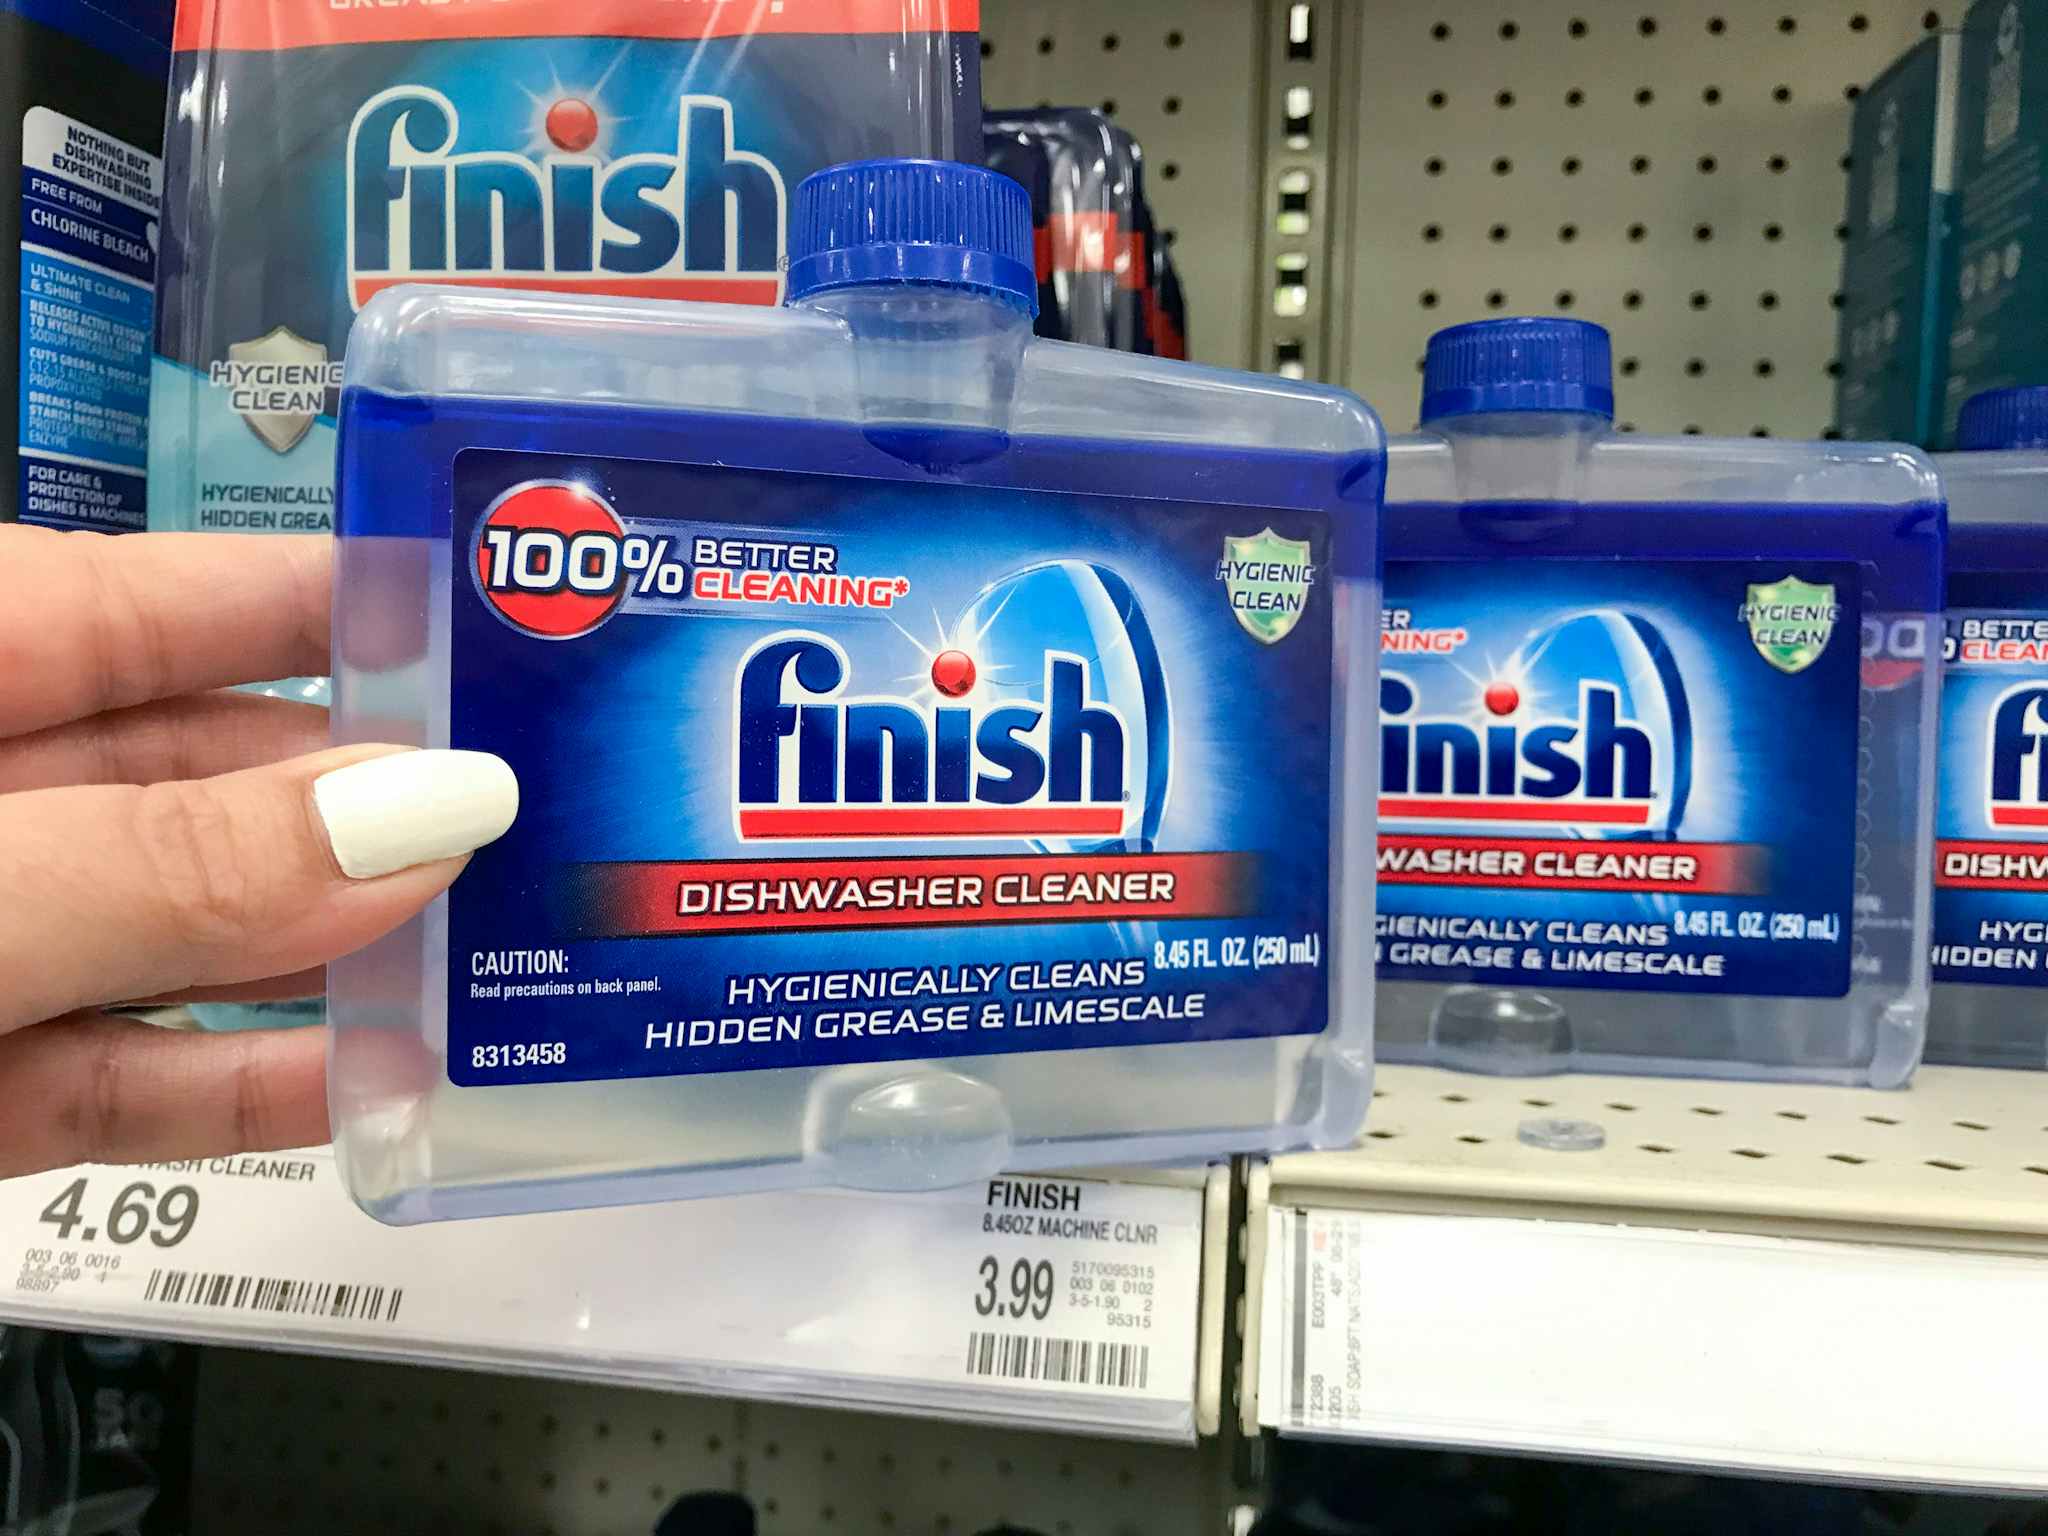 Finish Dishwasher Cleaner, as Low as $2.26 on Amazon (Reg. $4.88)